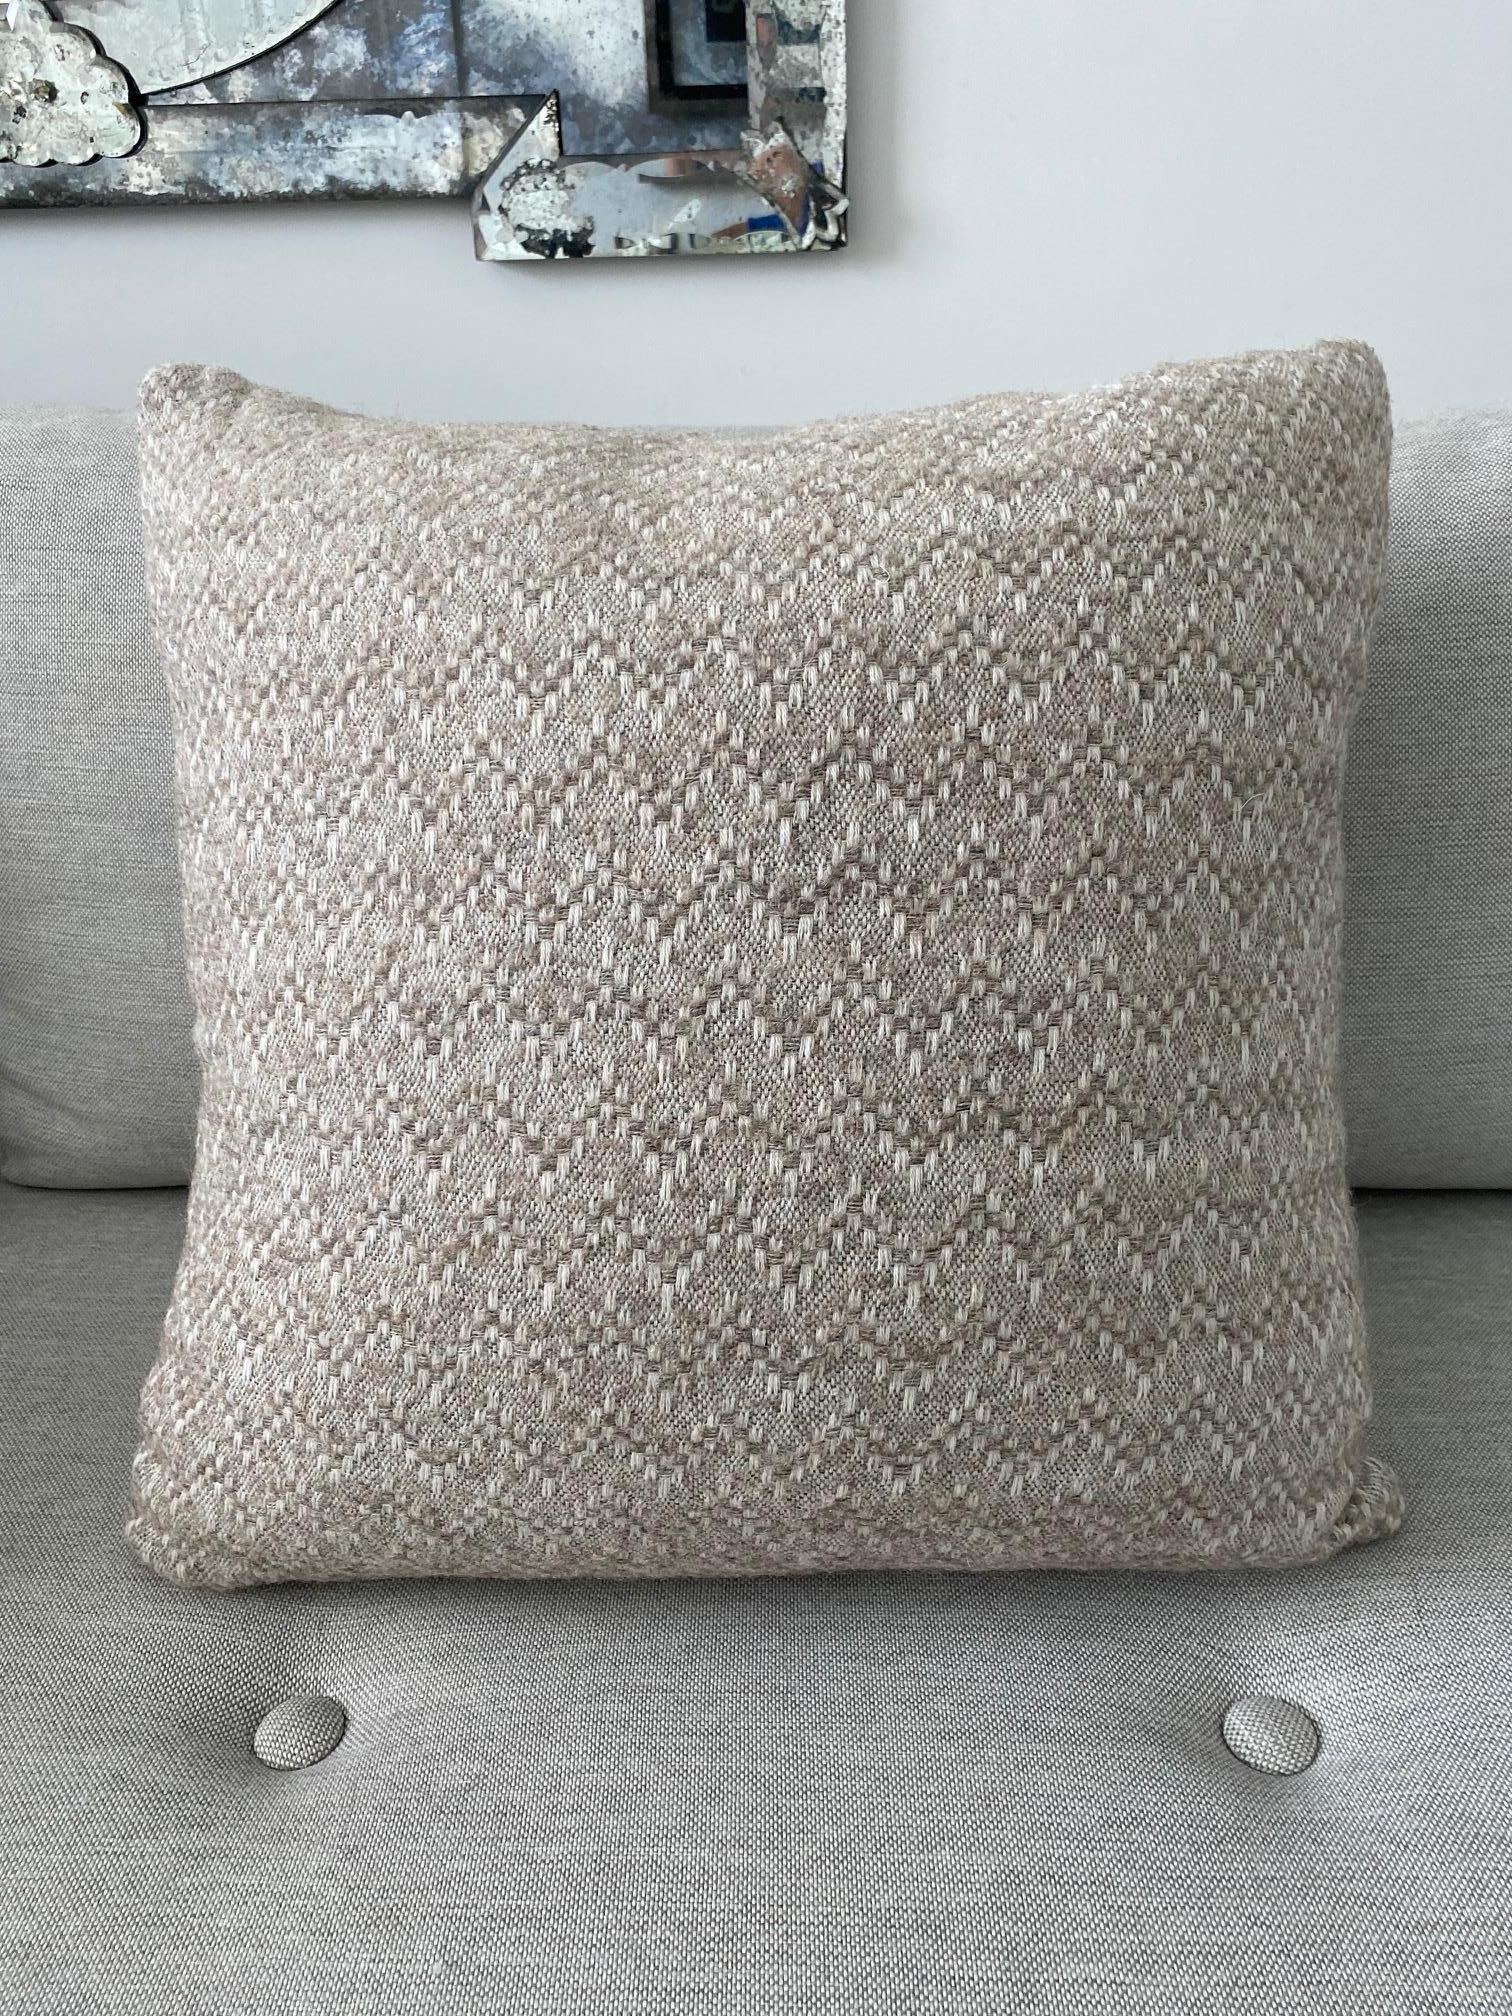 Handcrafted throw pillow made in Pierre Frey's Eva Racine. The large pillow features a blend of organic alpaca, mohair, and merino wools to create this stunning woven textile with a modern chevron pattern. Pillow features the same fabric on both